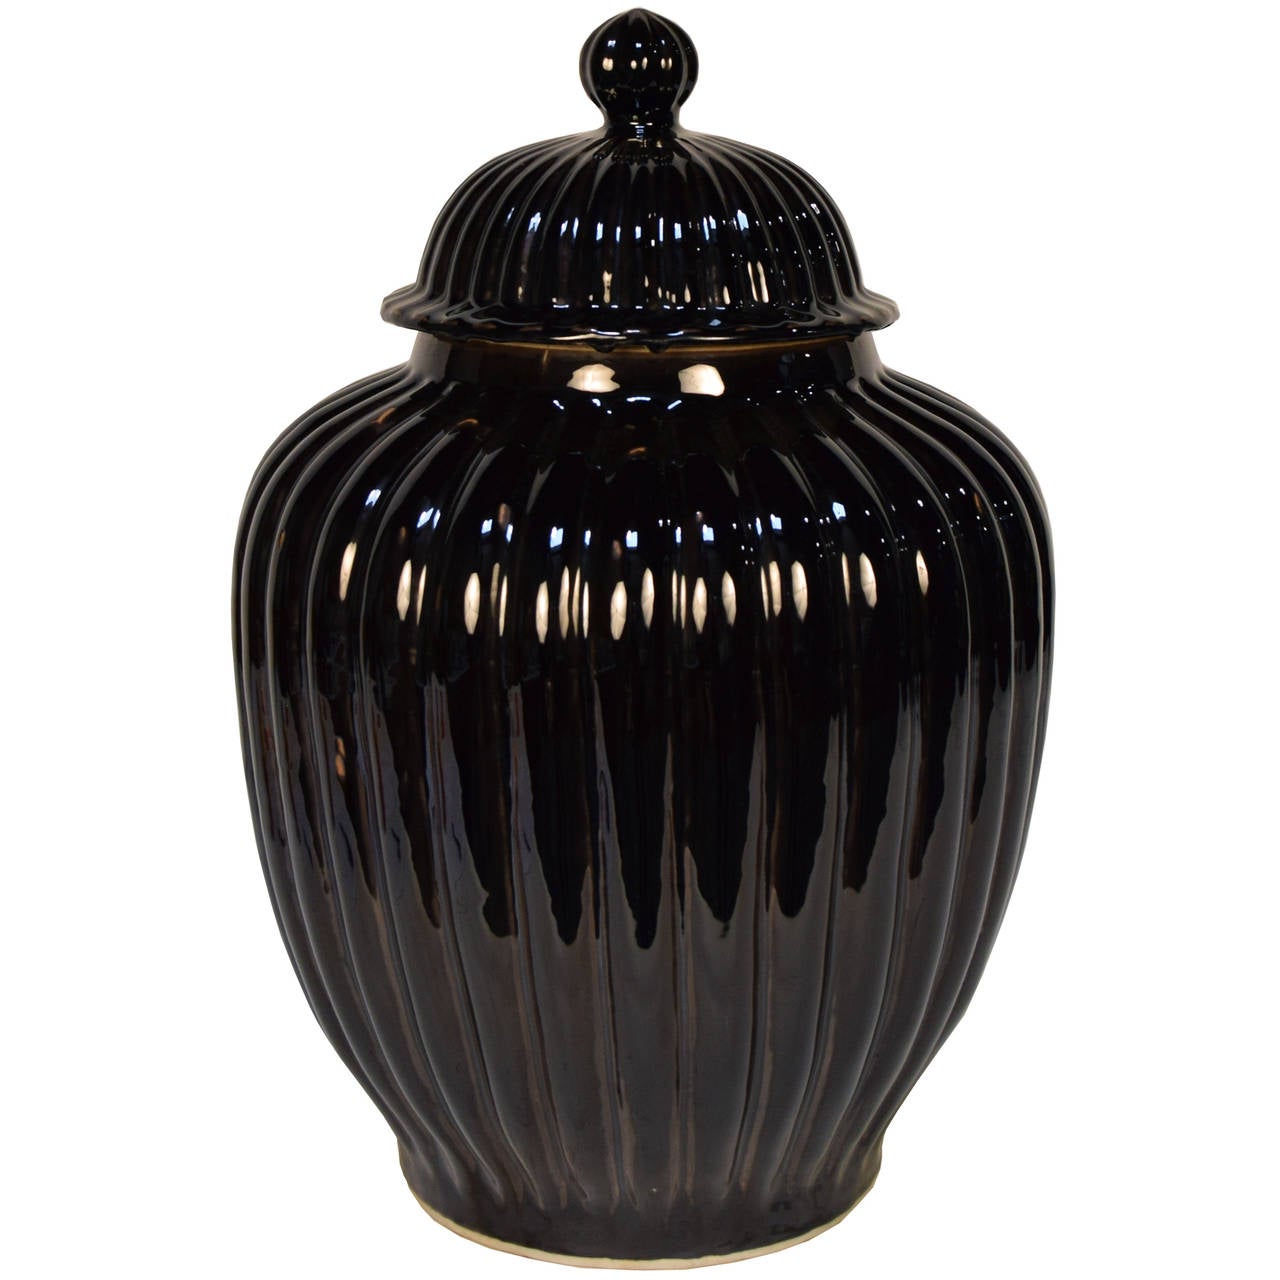 Ceramic black glazed ribbed melon shaped jar with lid from Beijing, China.